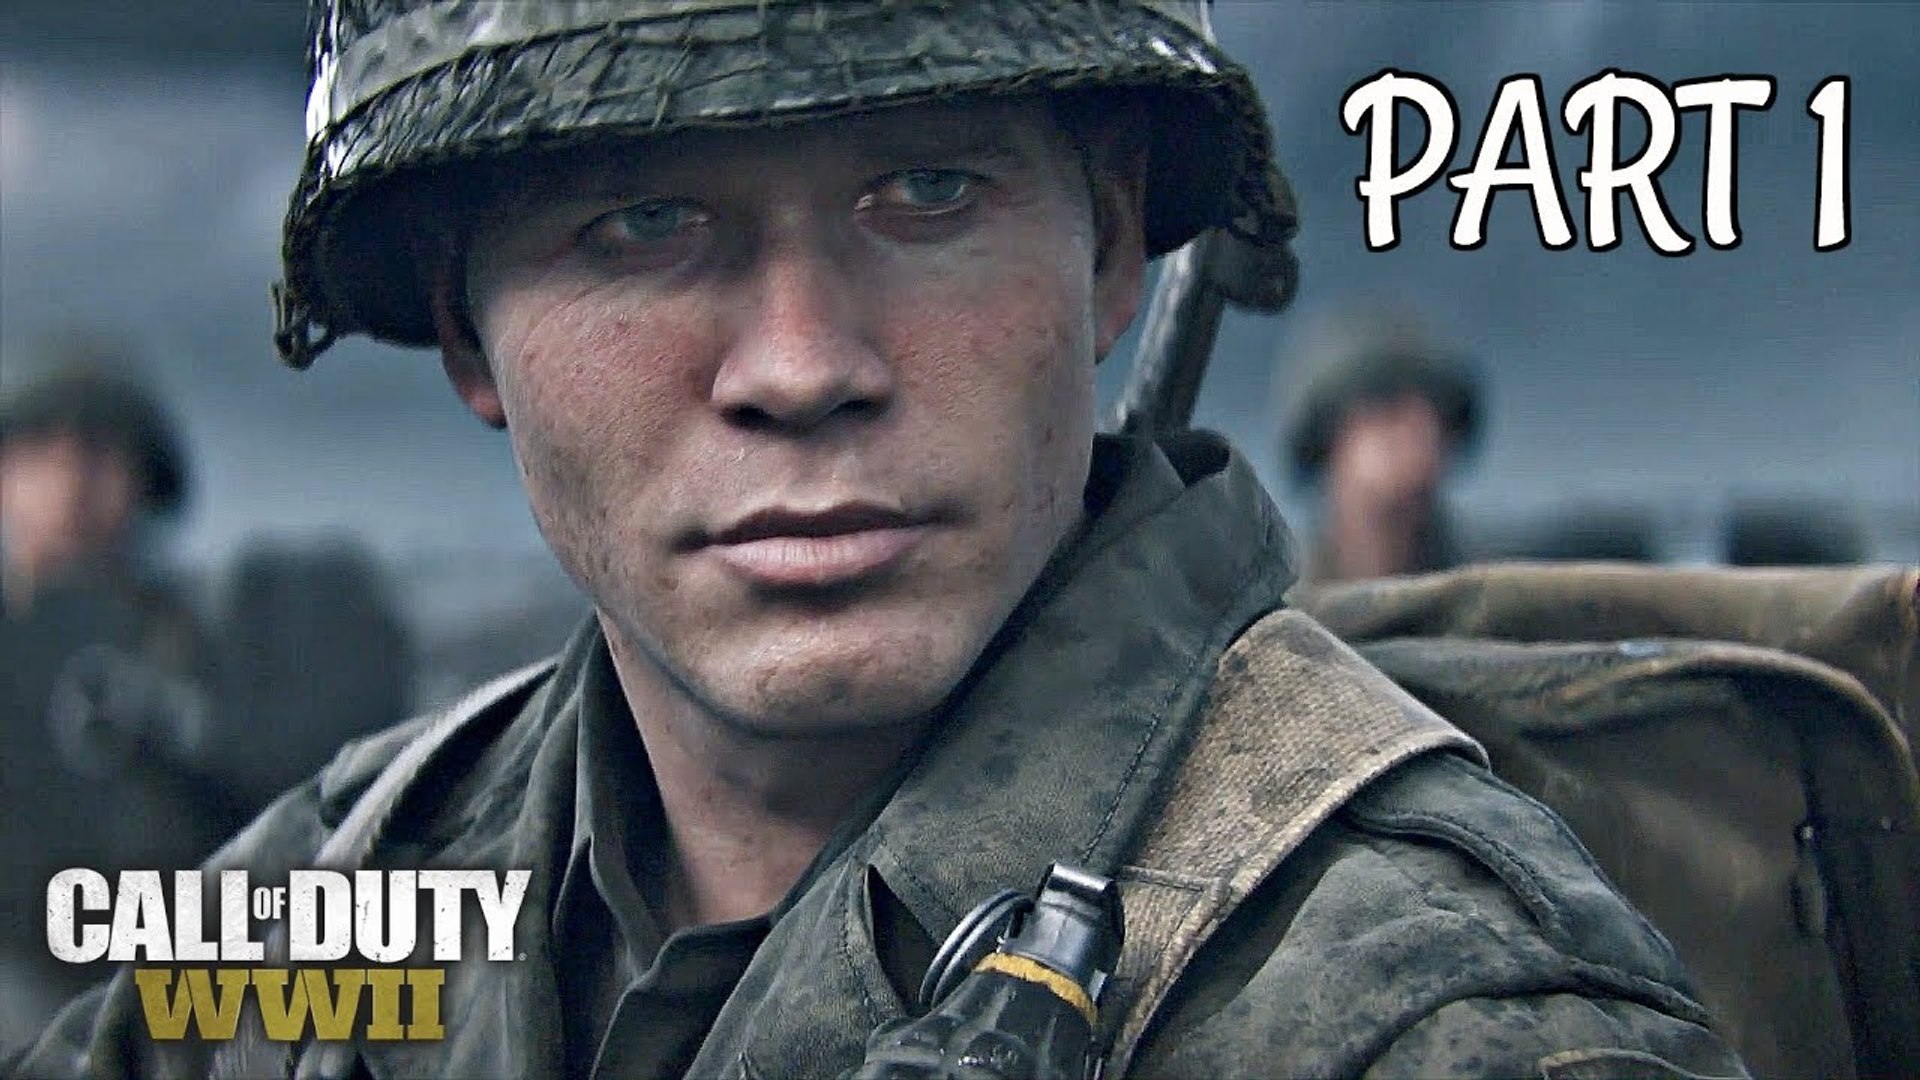 CALL OF DUTY WW2 Walkthrough Part Normandy - Campaign Mission | COD World War 2 | - video Dailymotion